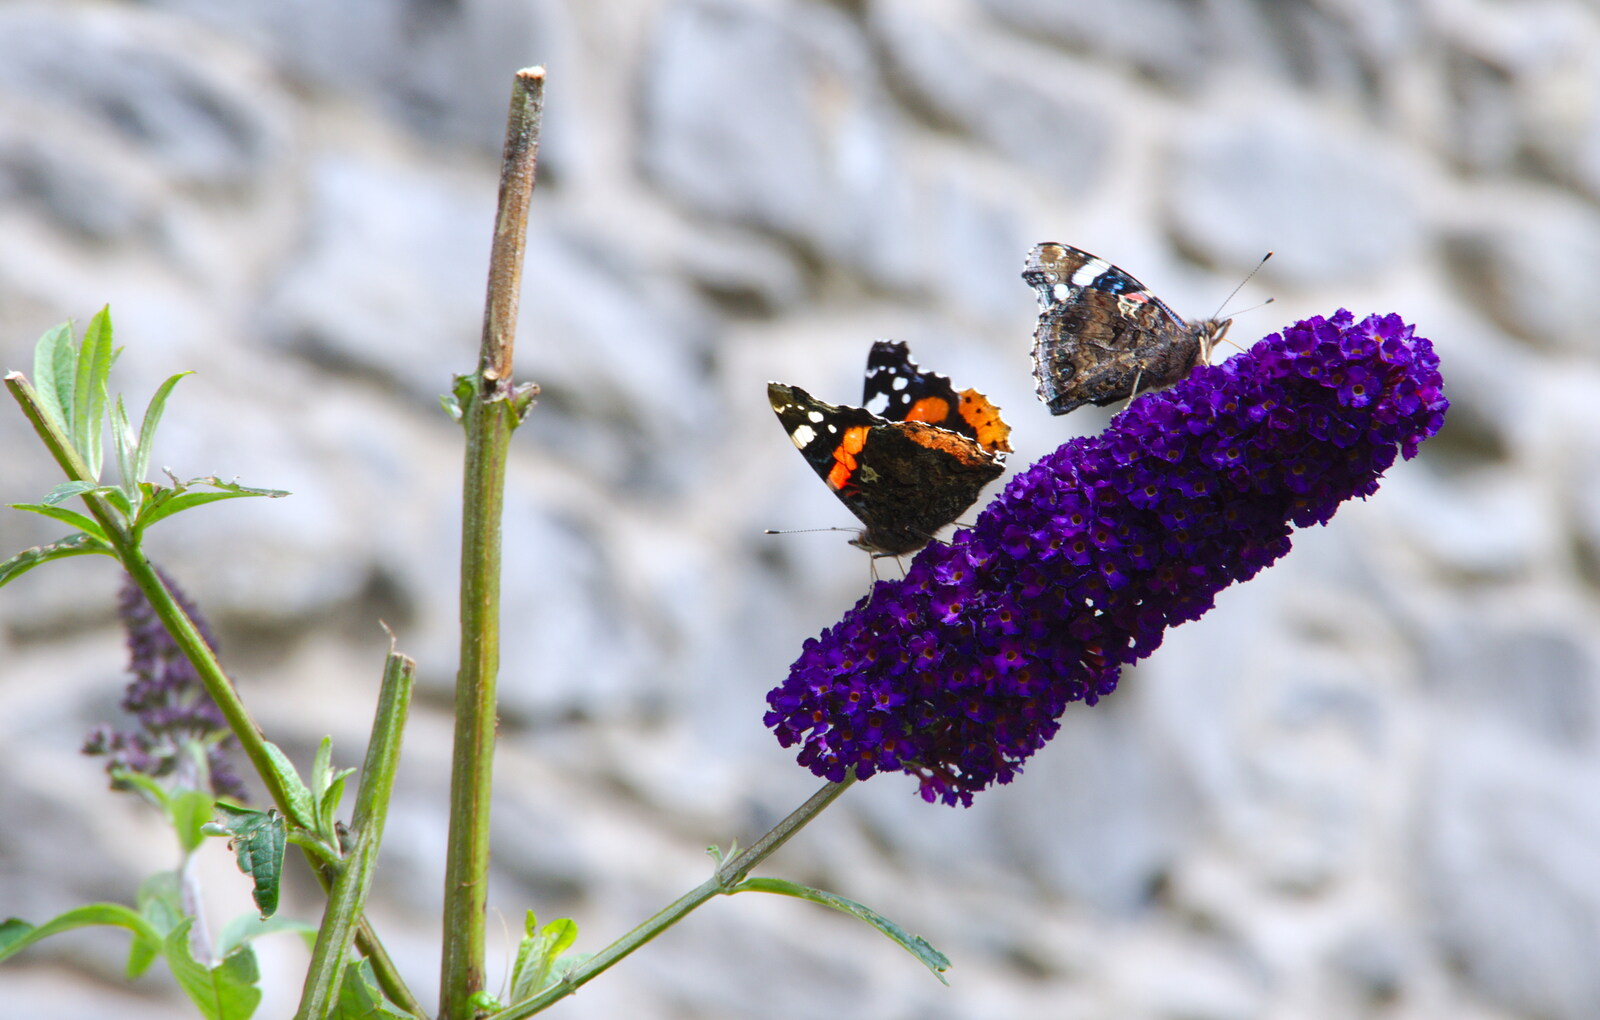 Butterflies on some buddleia from Mullaghmore Beach and Marble Arch Caves, Sligo and Fermanagh, Ireland - 19th August 2019